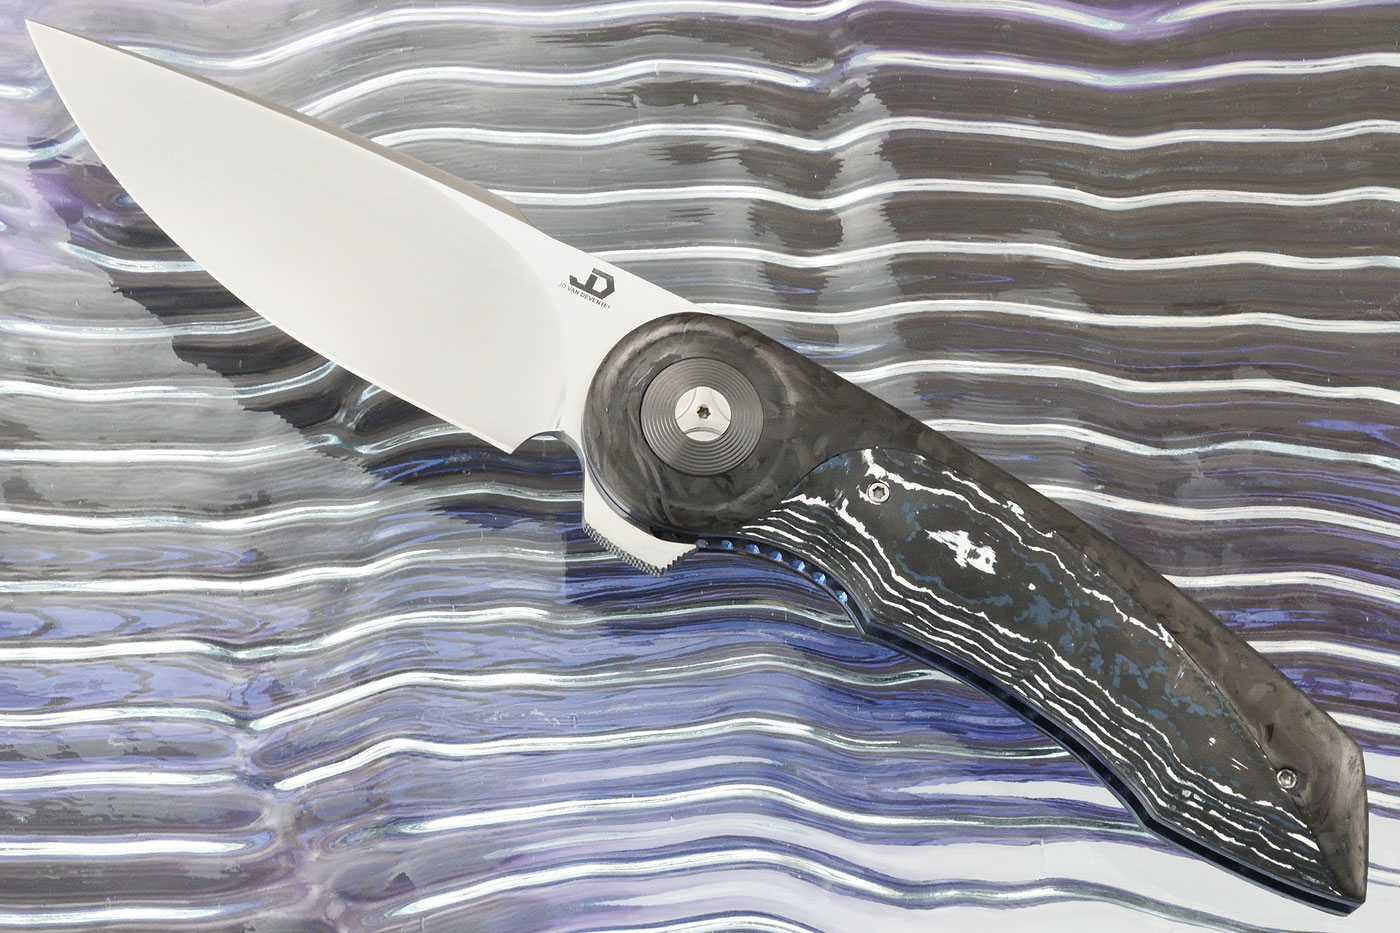 Gold Midi Flipper with Marble Carbon Fiber and FatCarbon (IKBS) - M390